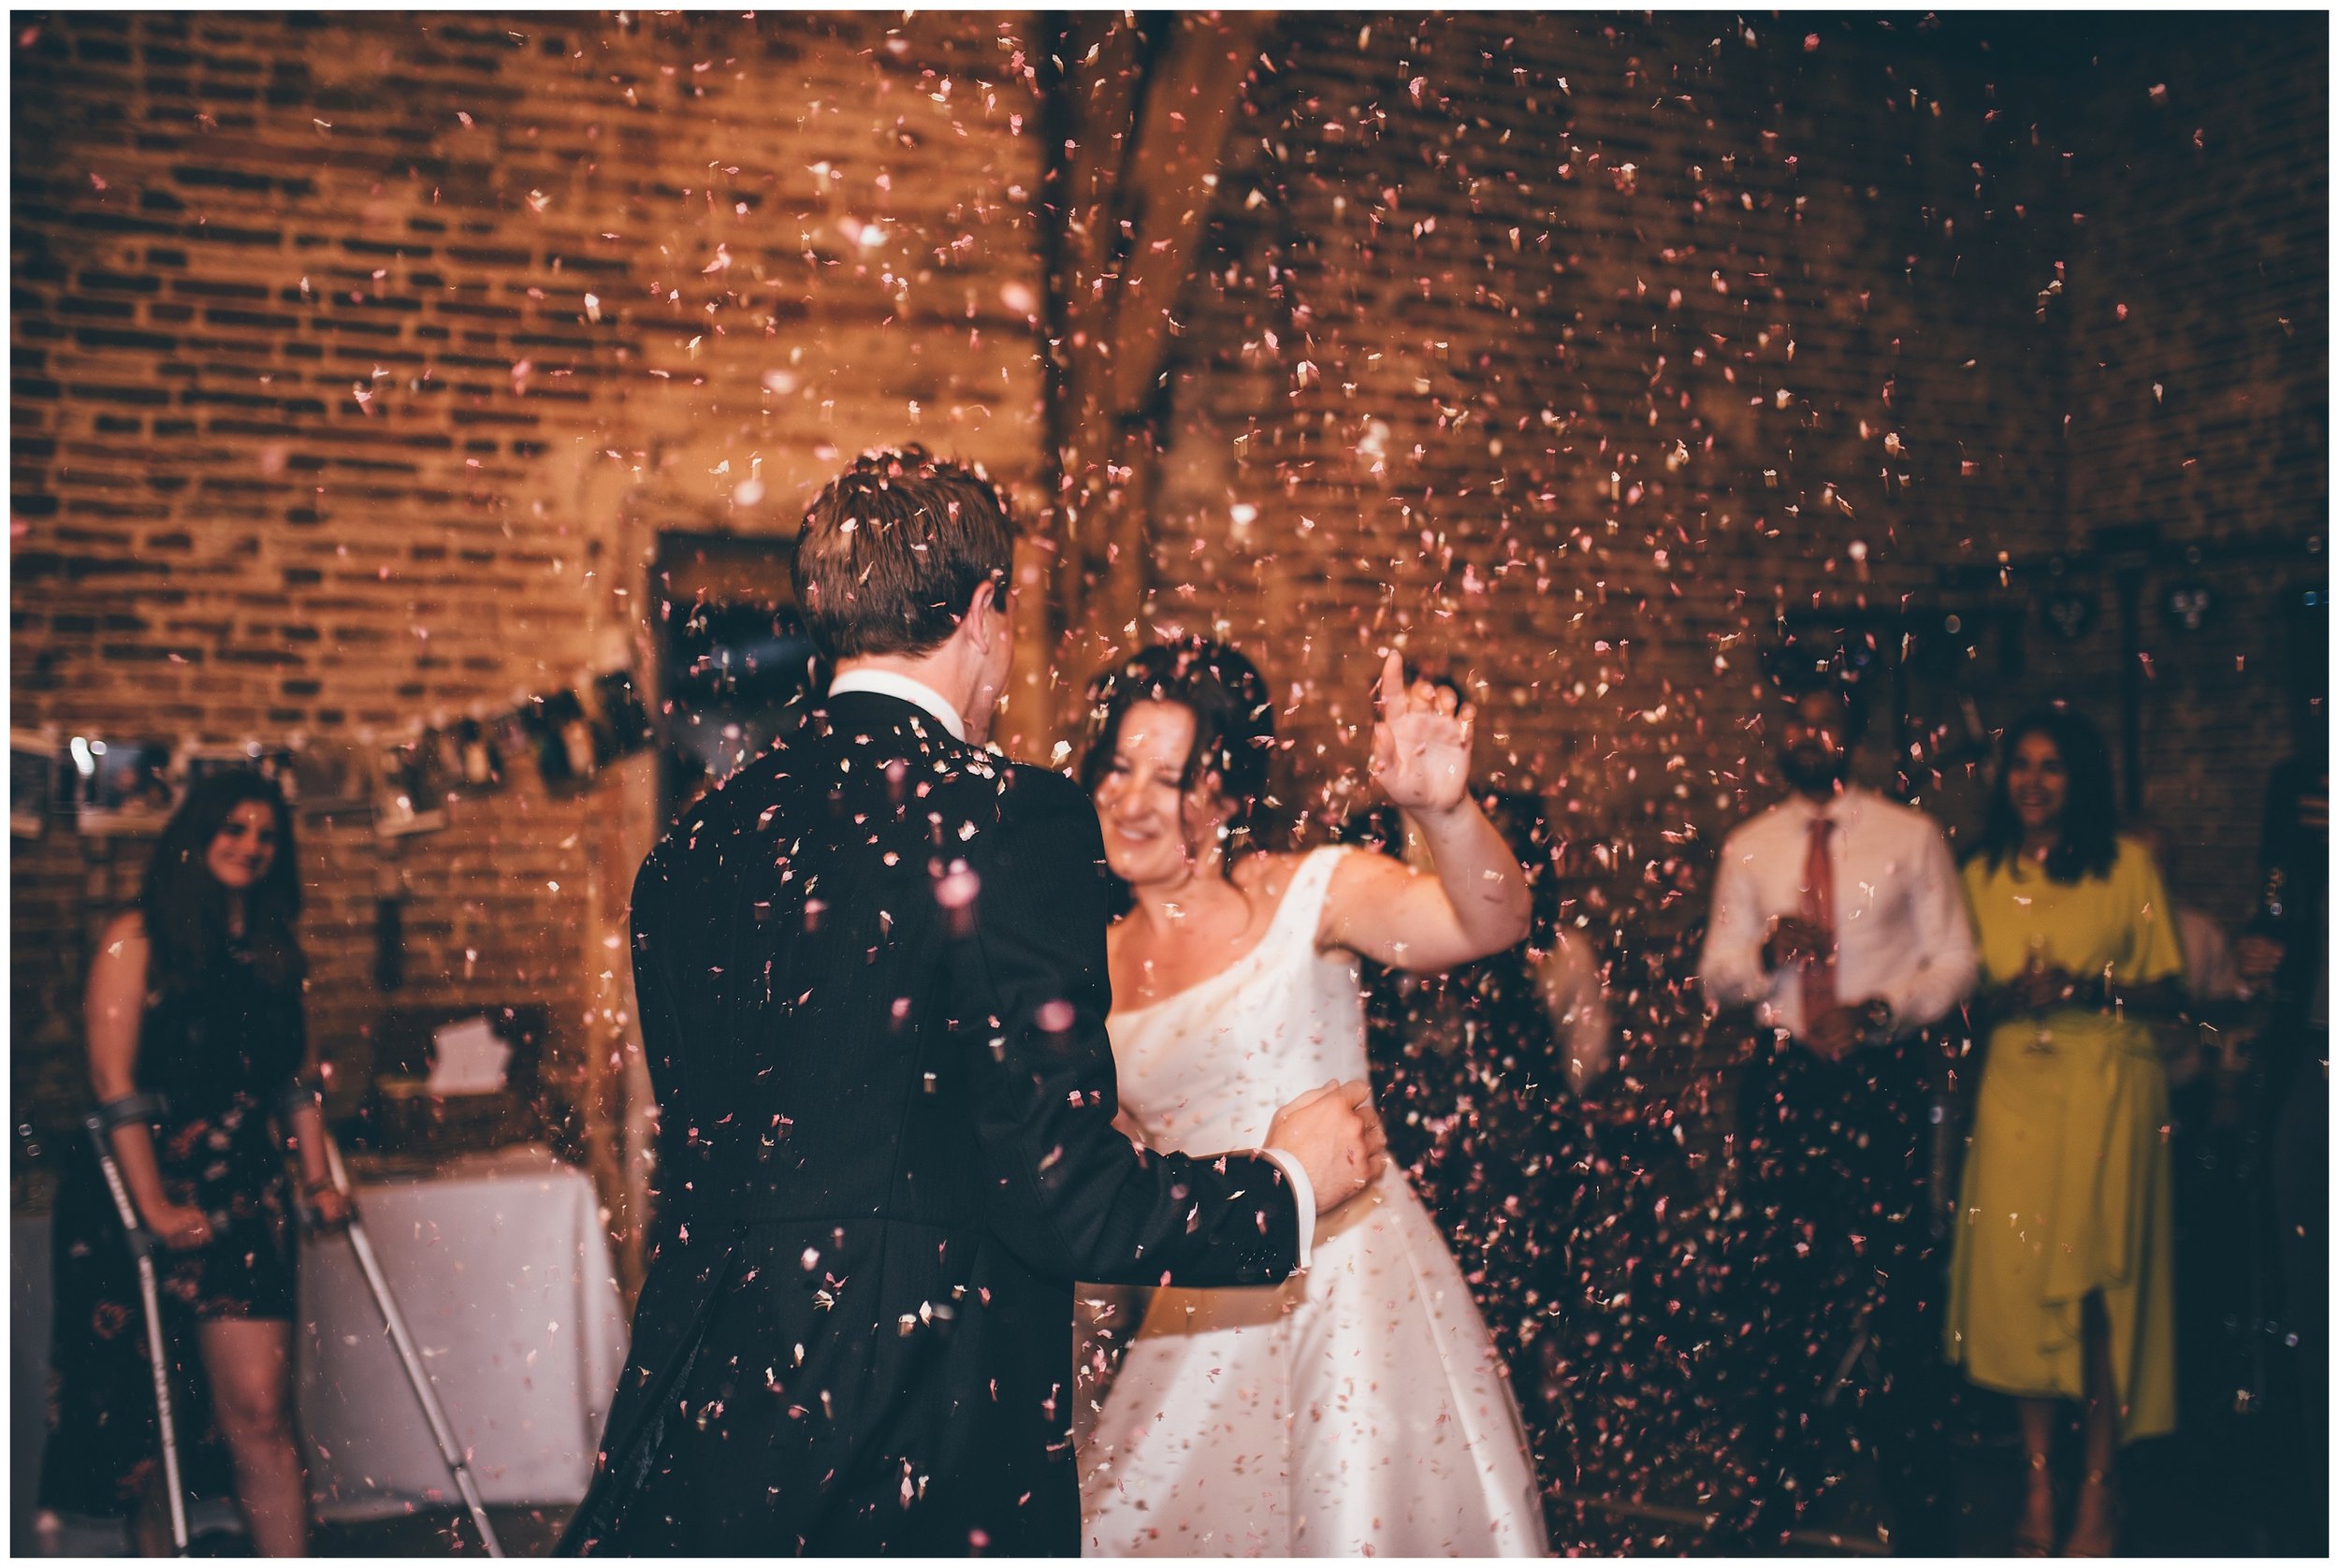 Confetti canon during the First Dance at Henham Park wedding barns in Southwold.